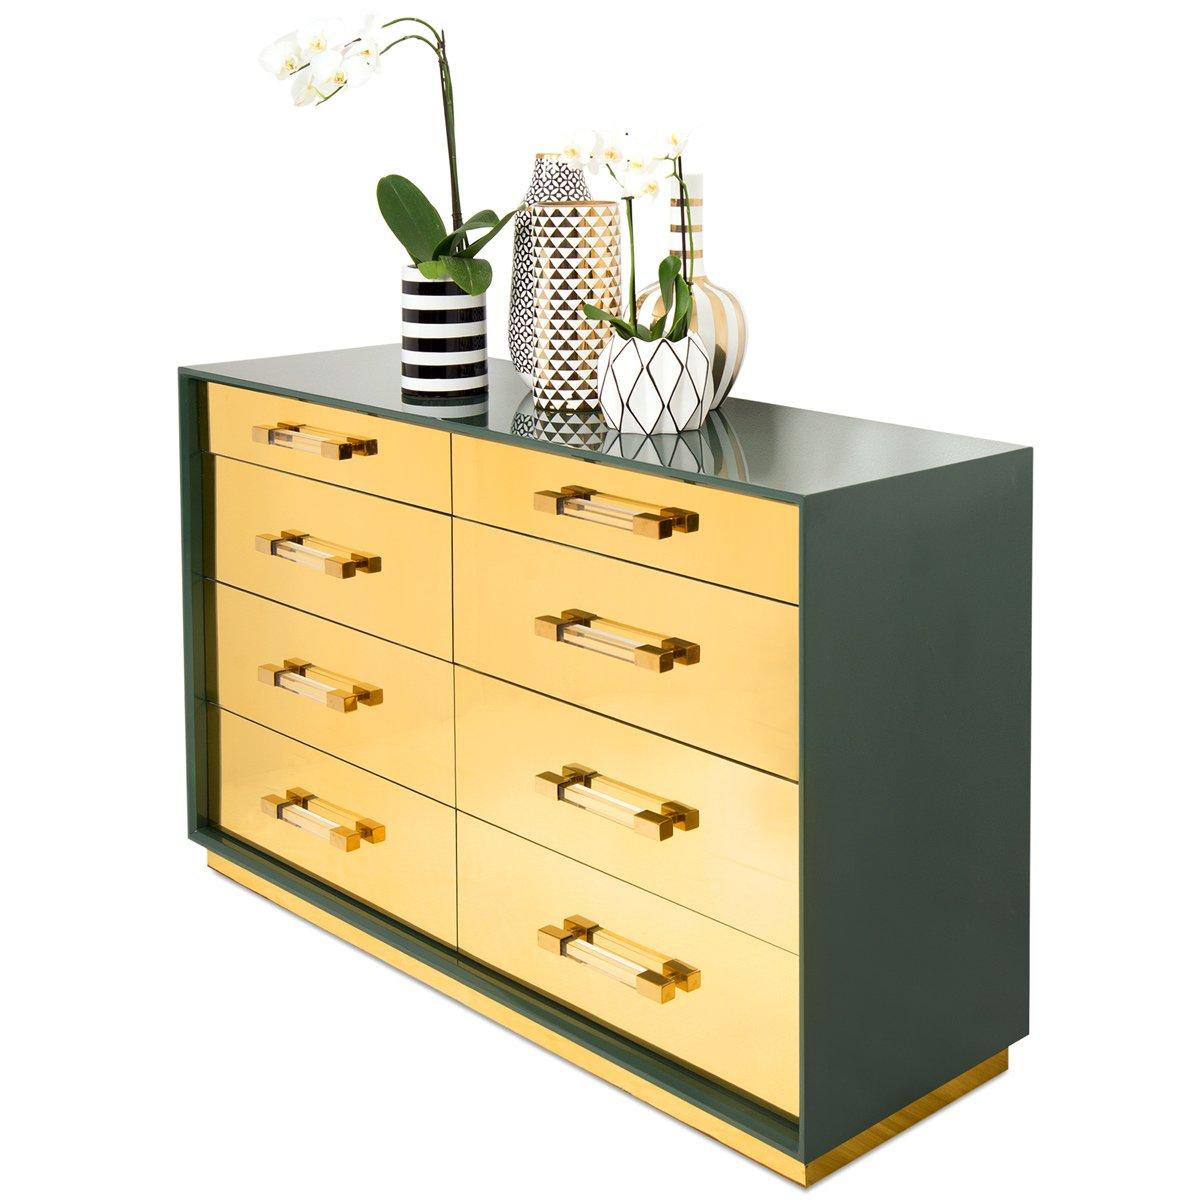 Introducing the Mauritius dresser. This tall dresser features plenty of storage with eight drawers and plenty of style with shiny brass veneer drawers, a glossy Hunter Green finish, Lucite and shiny brass bar pulls, and a shiny brass toe kick. With